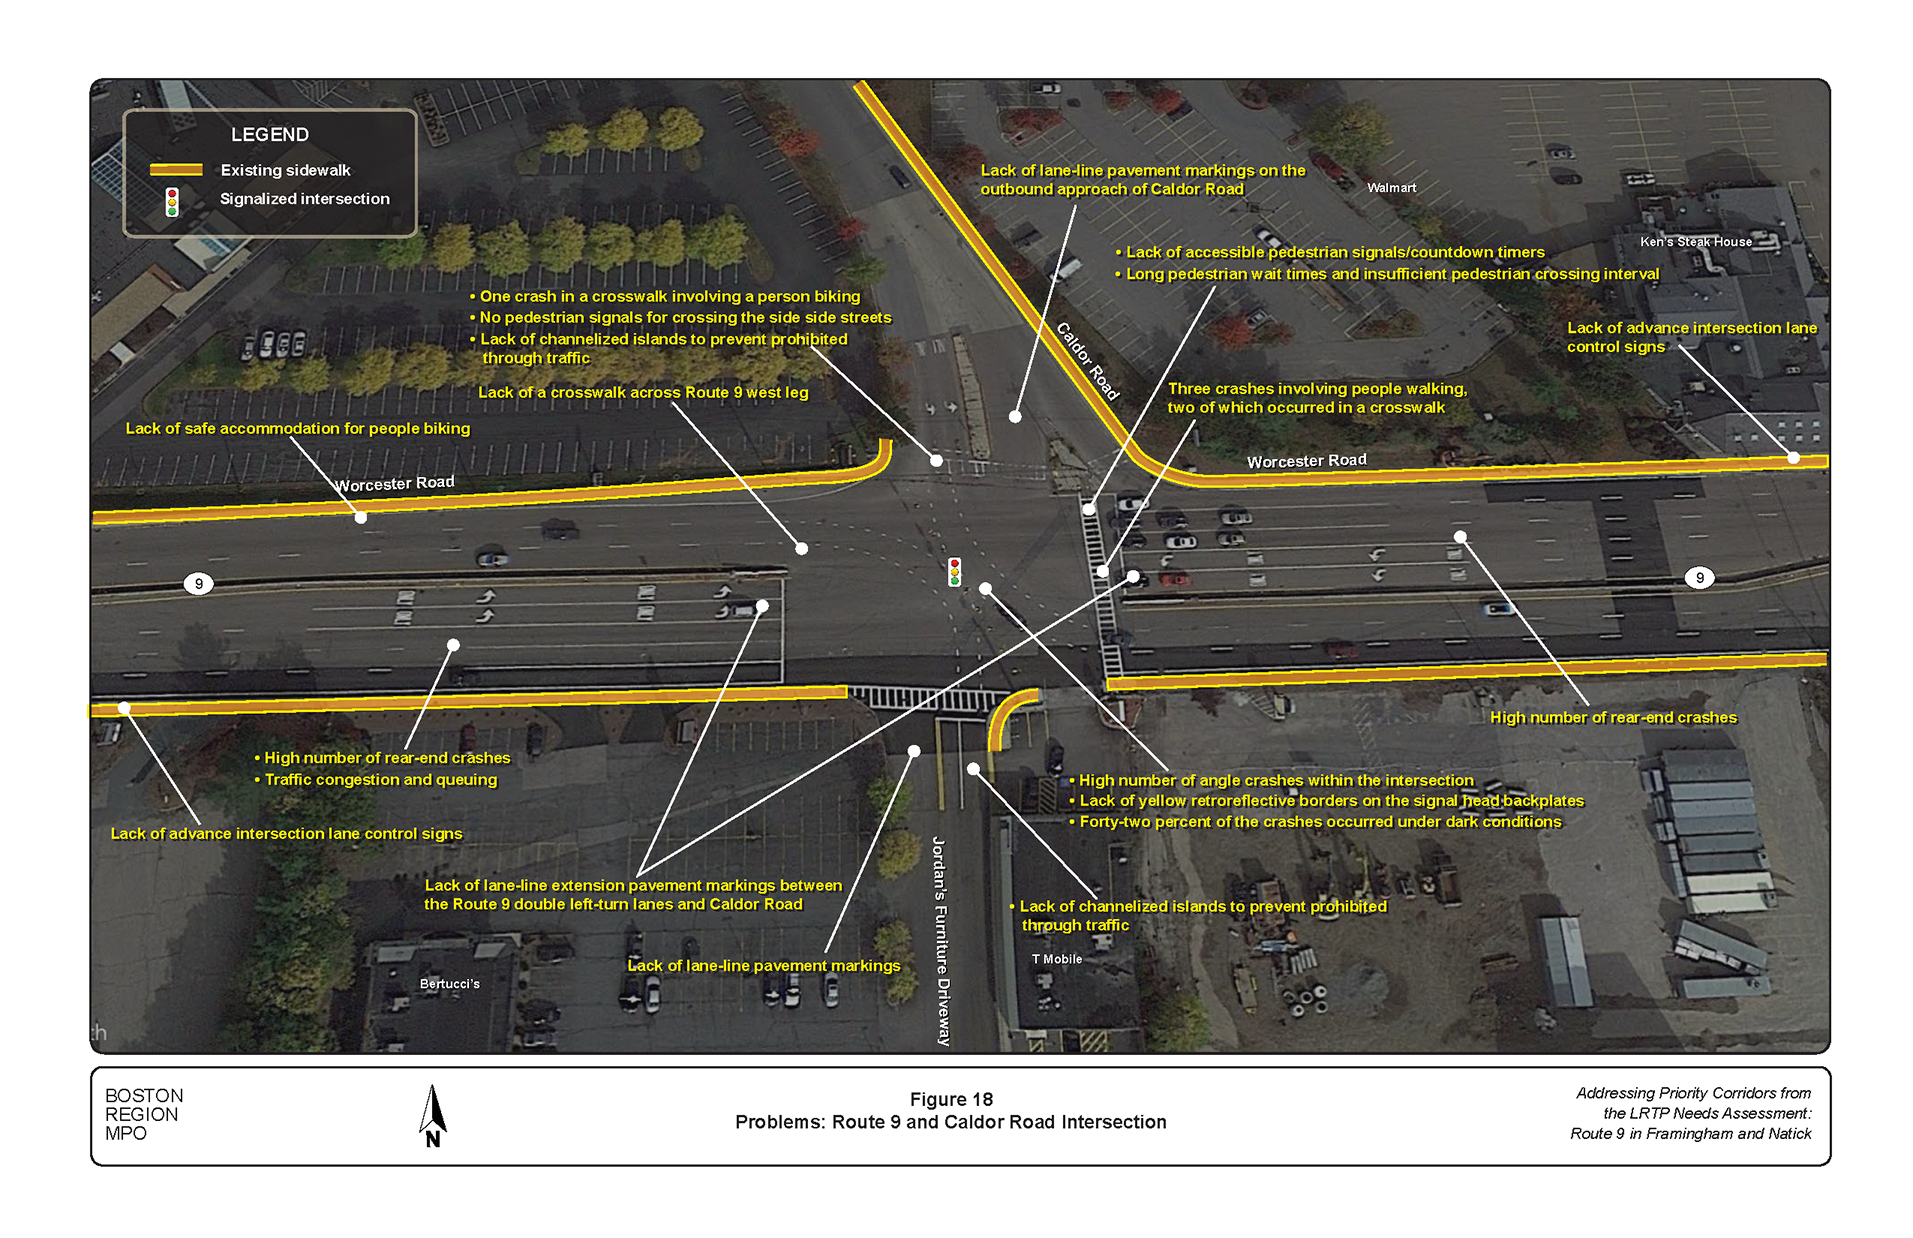 Figure 18 is an aerial photo showing the intersection of Route 9 and Caldor Road and the problems